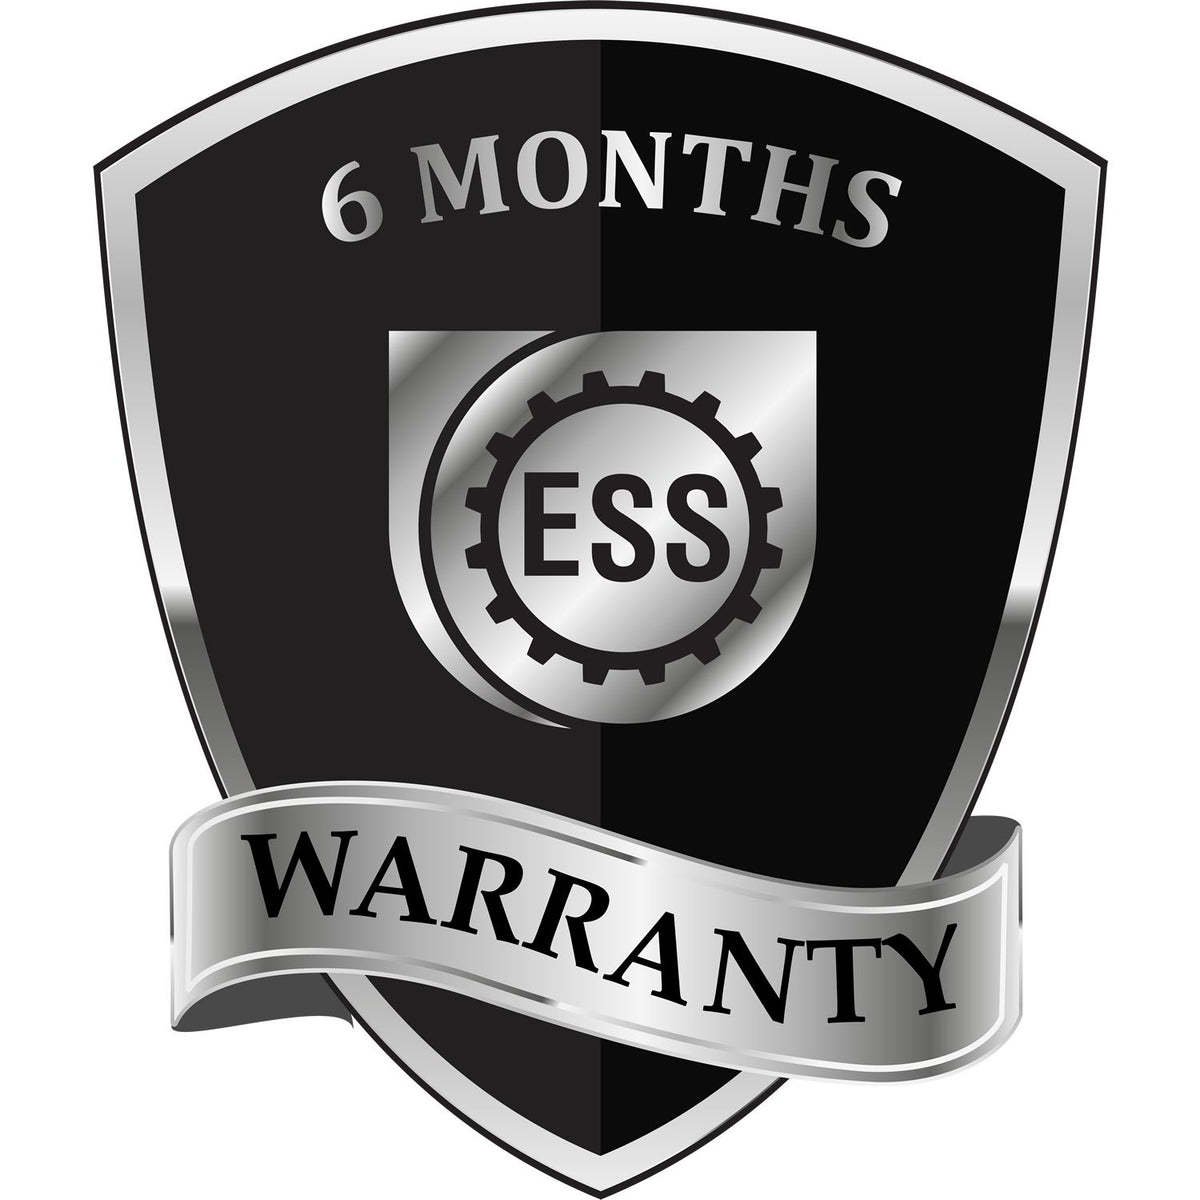 A black and silver badge or emblem showing warranty information for the Self-Inking Georgia Geologist Stamp